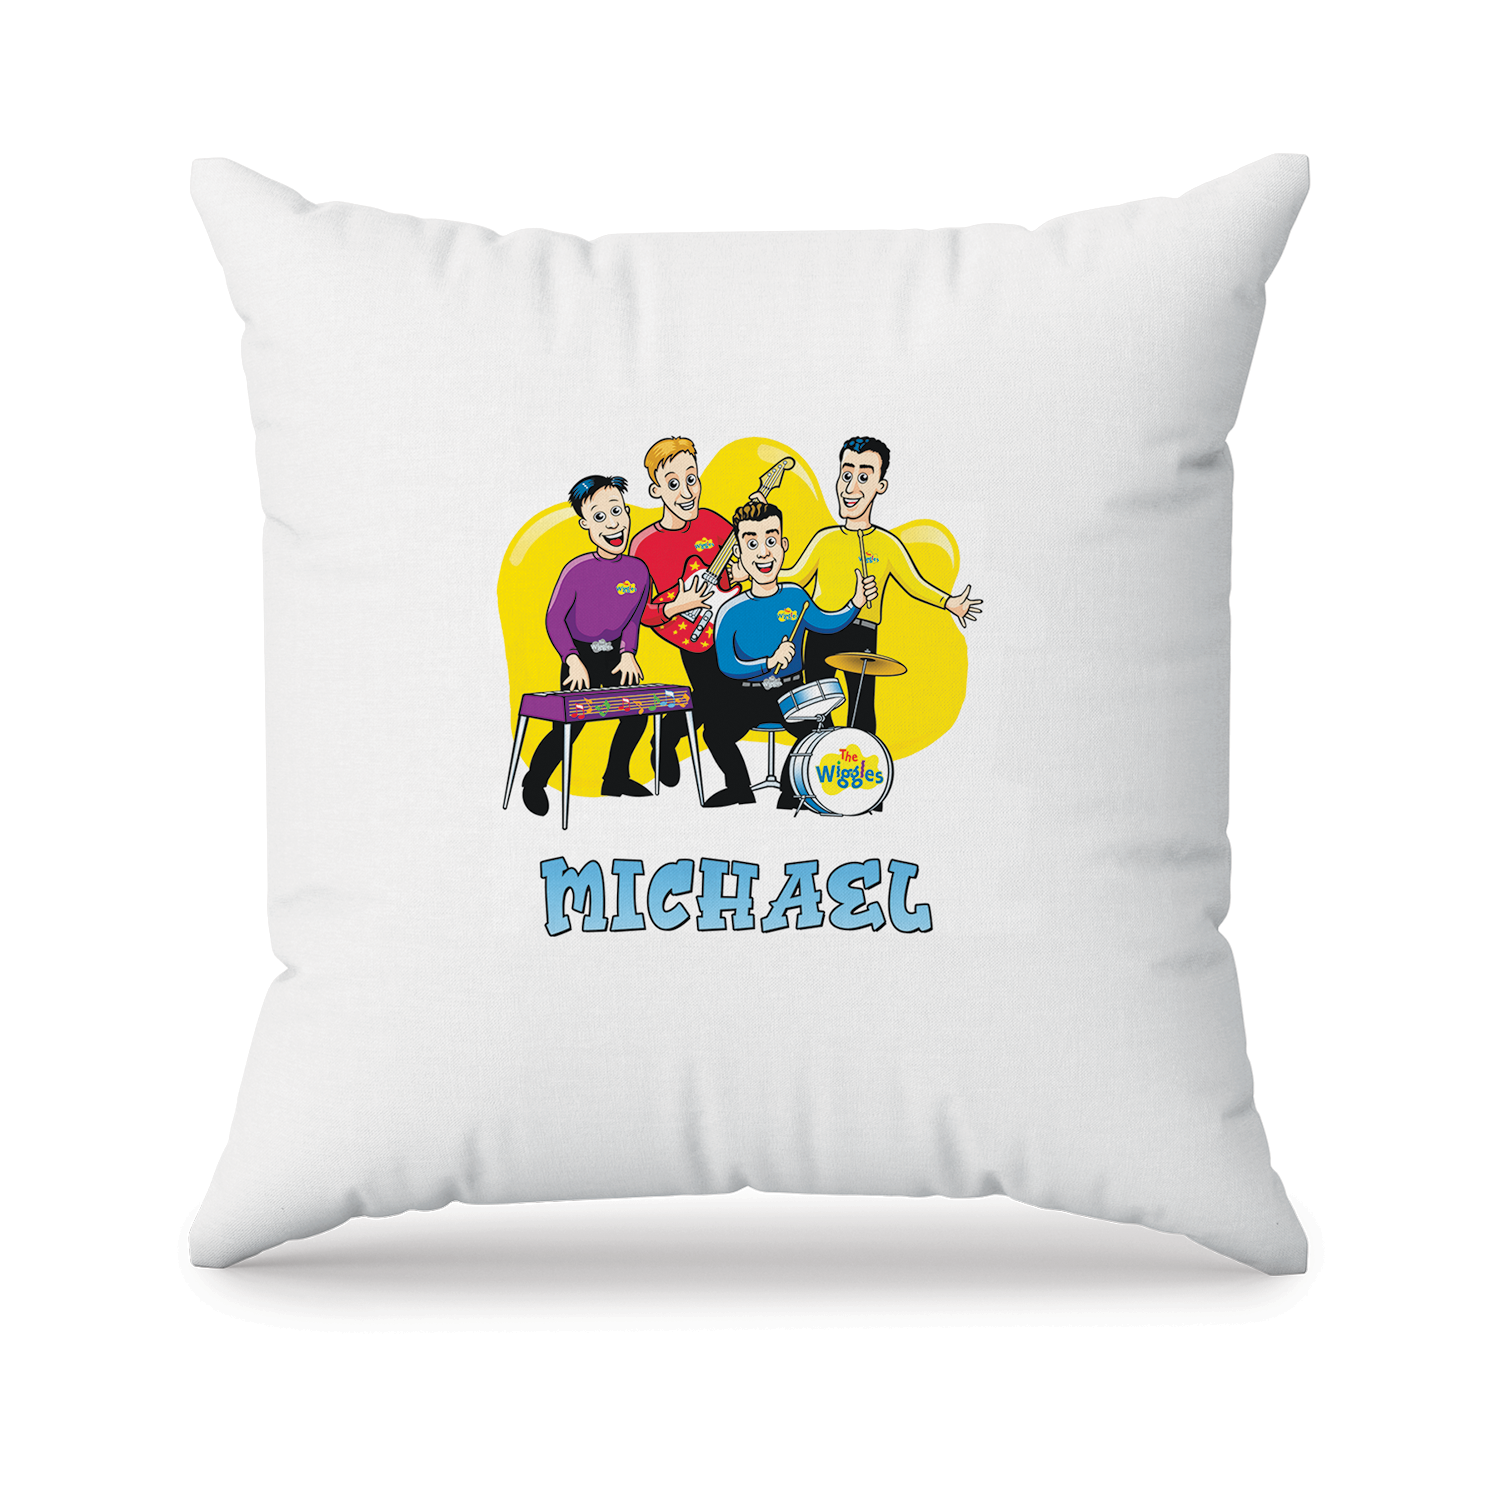 Personalized The Wiggles Sofa Pillowcase Gift for Kids: A white pillowcase with a personalized The Wiggles design.